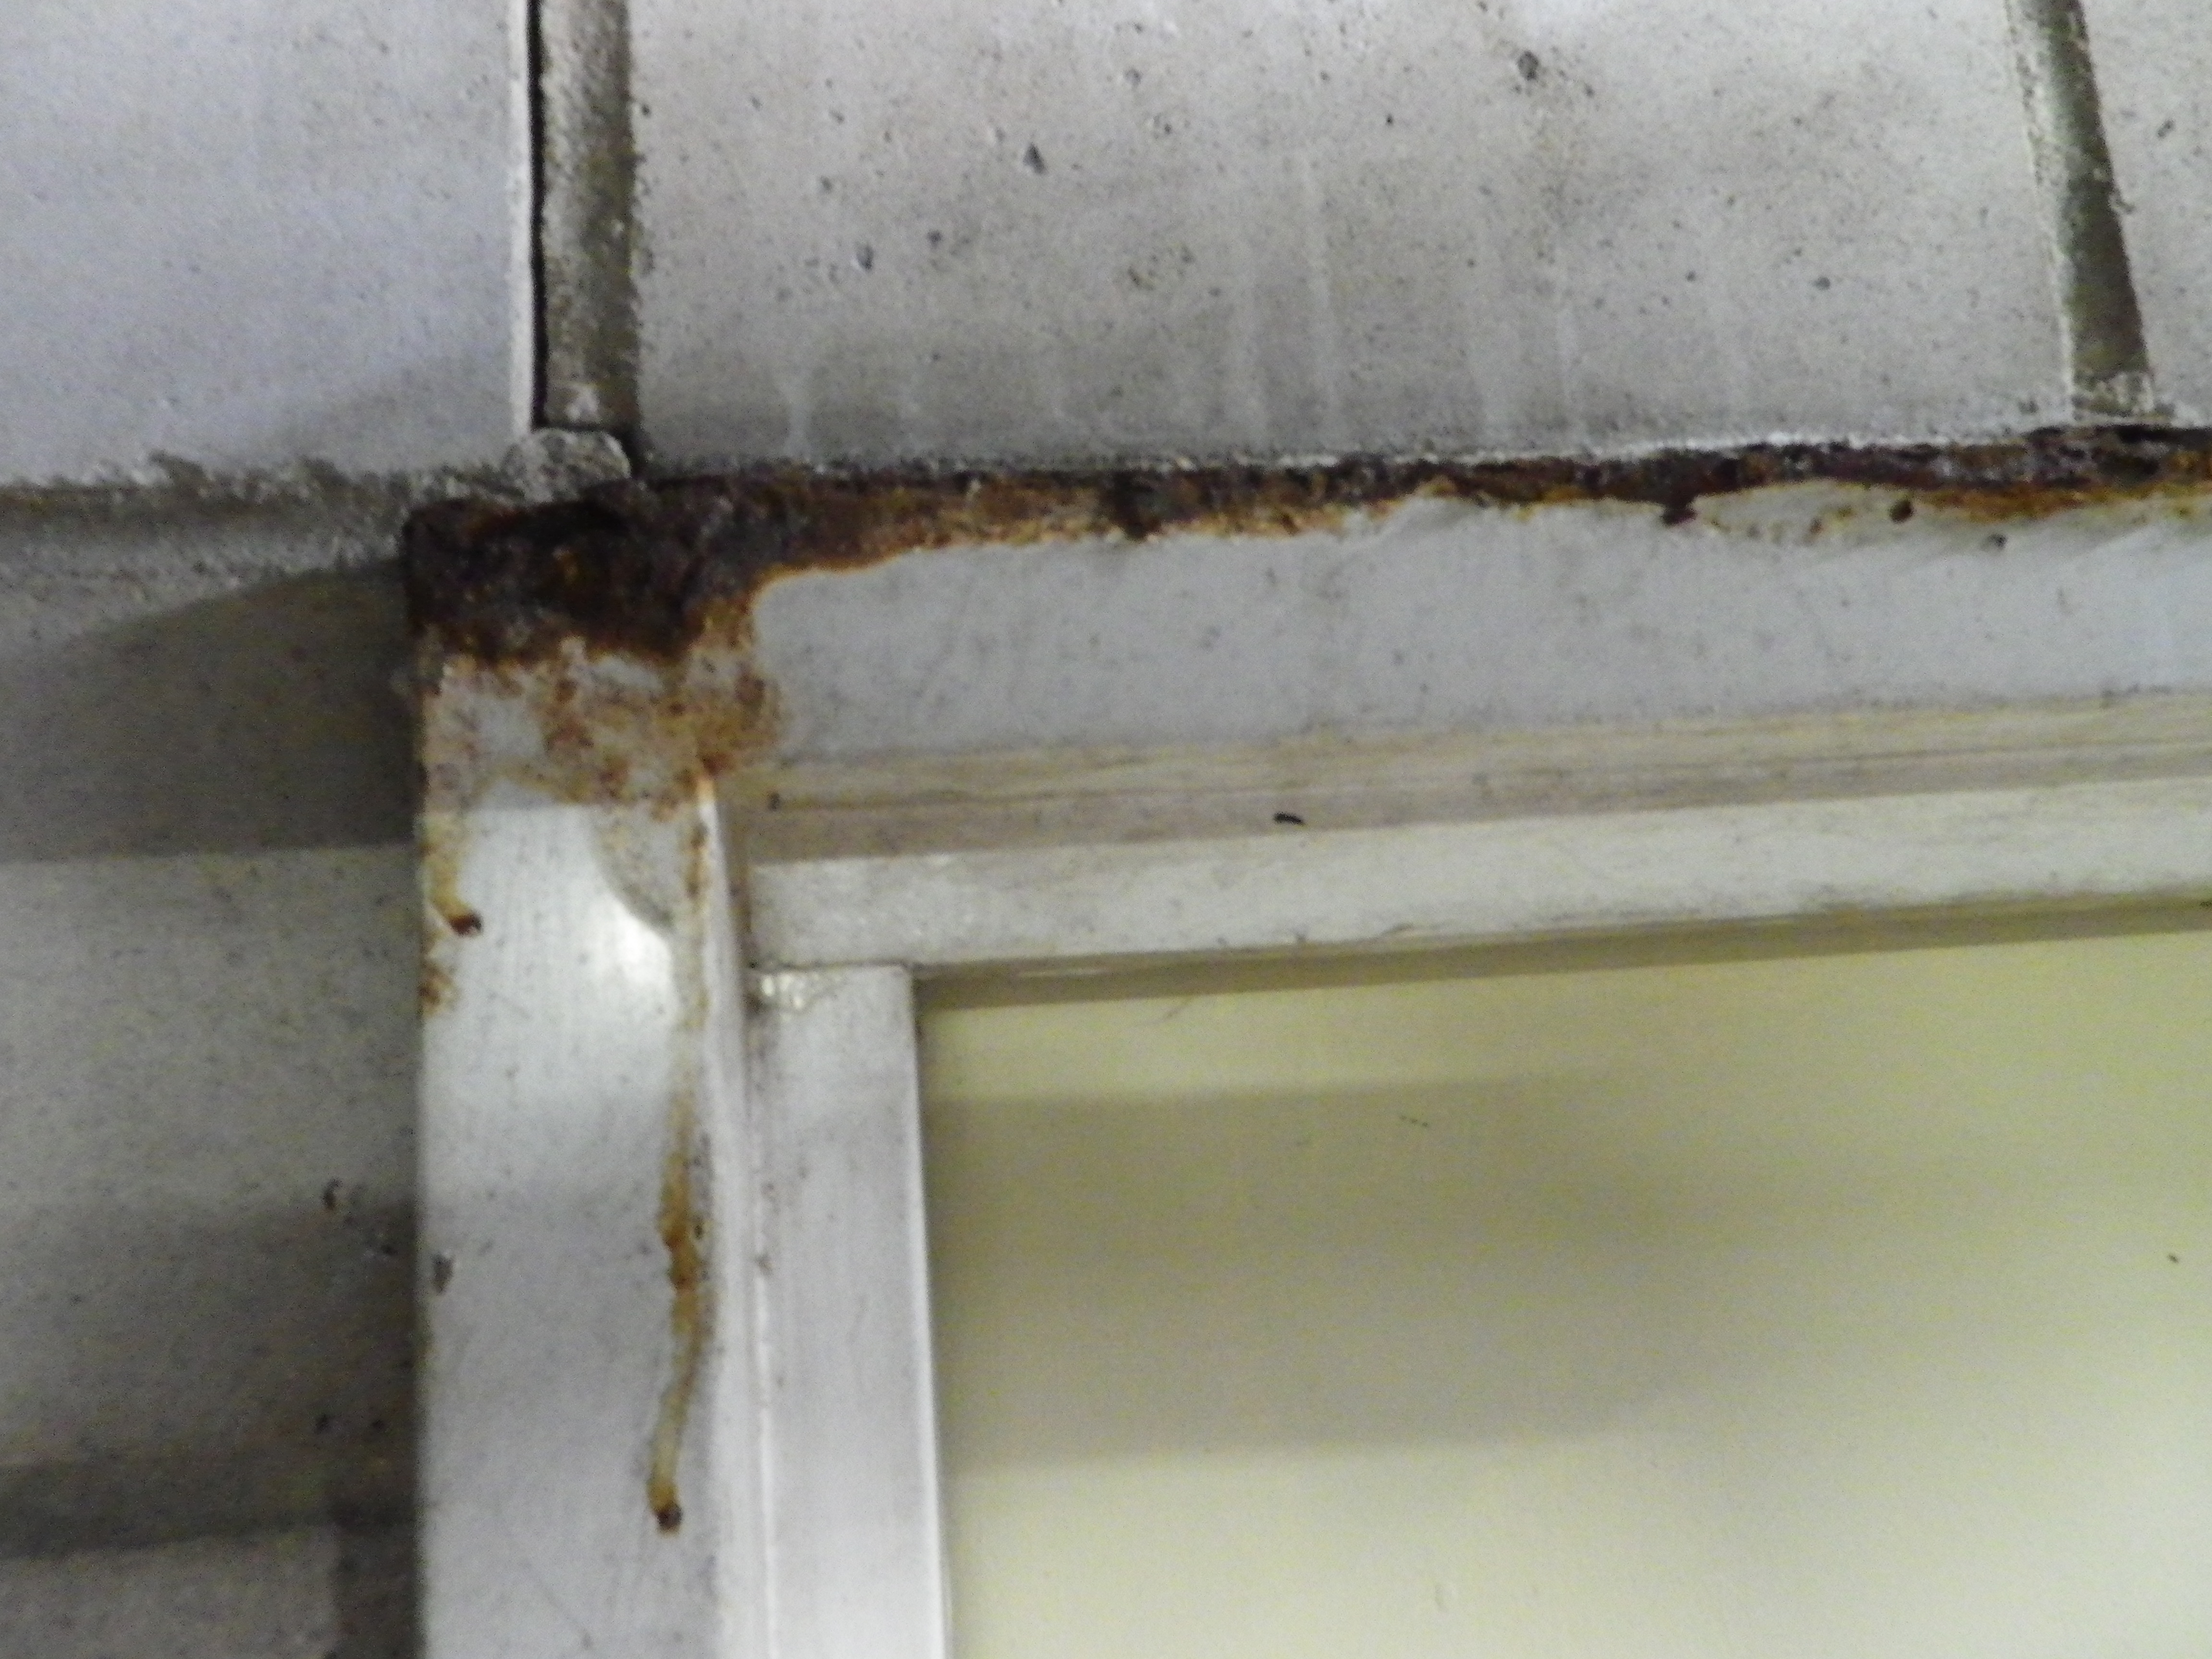 SP52948-Block-A-external-fire-door-2-rusted-frame-due-to-water-damages-photo-6-16Apr2021.jpg